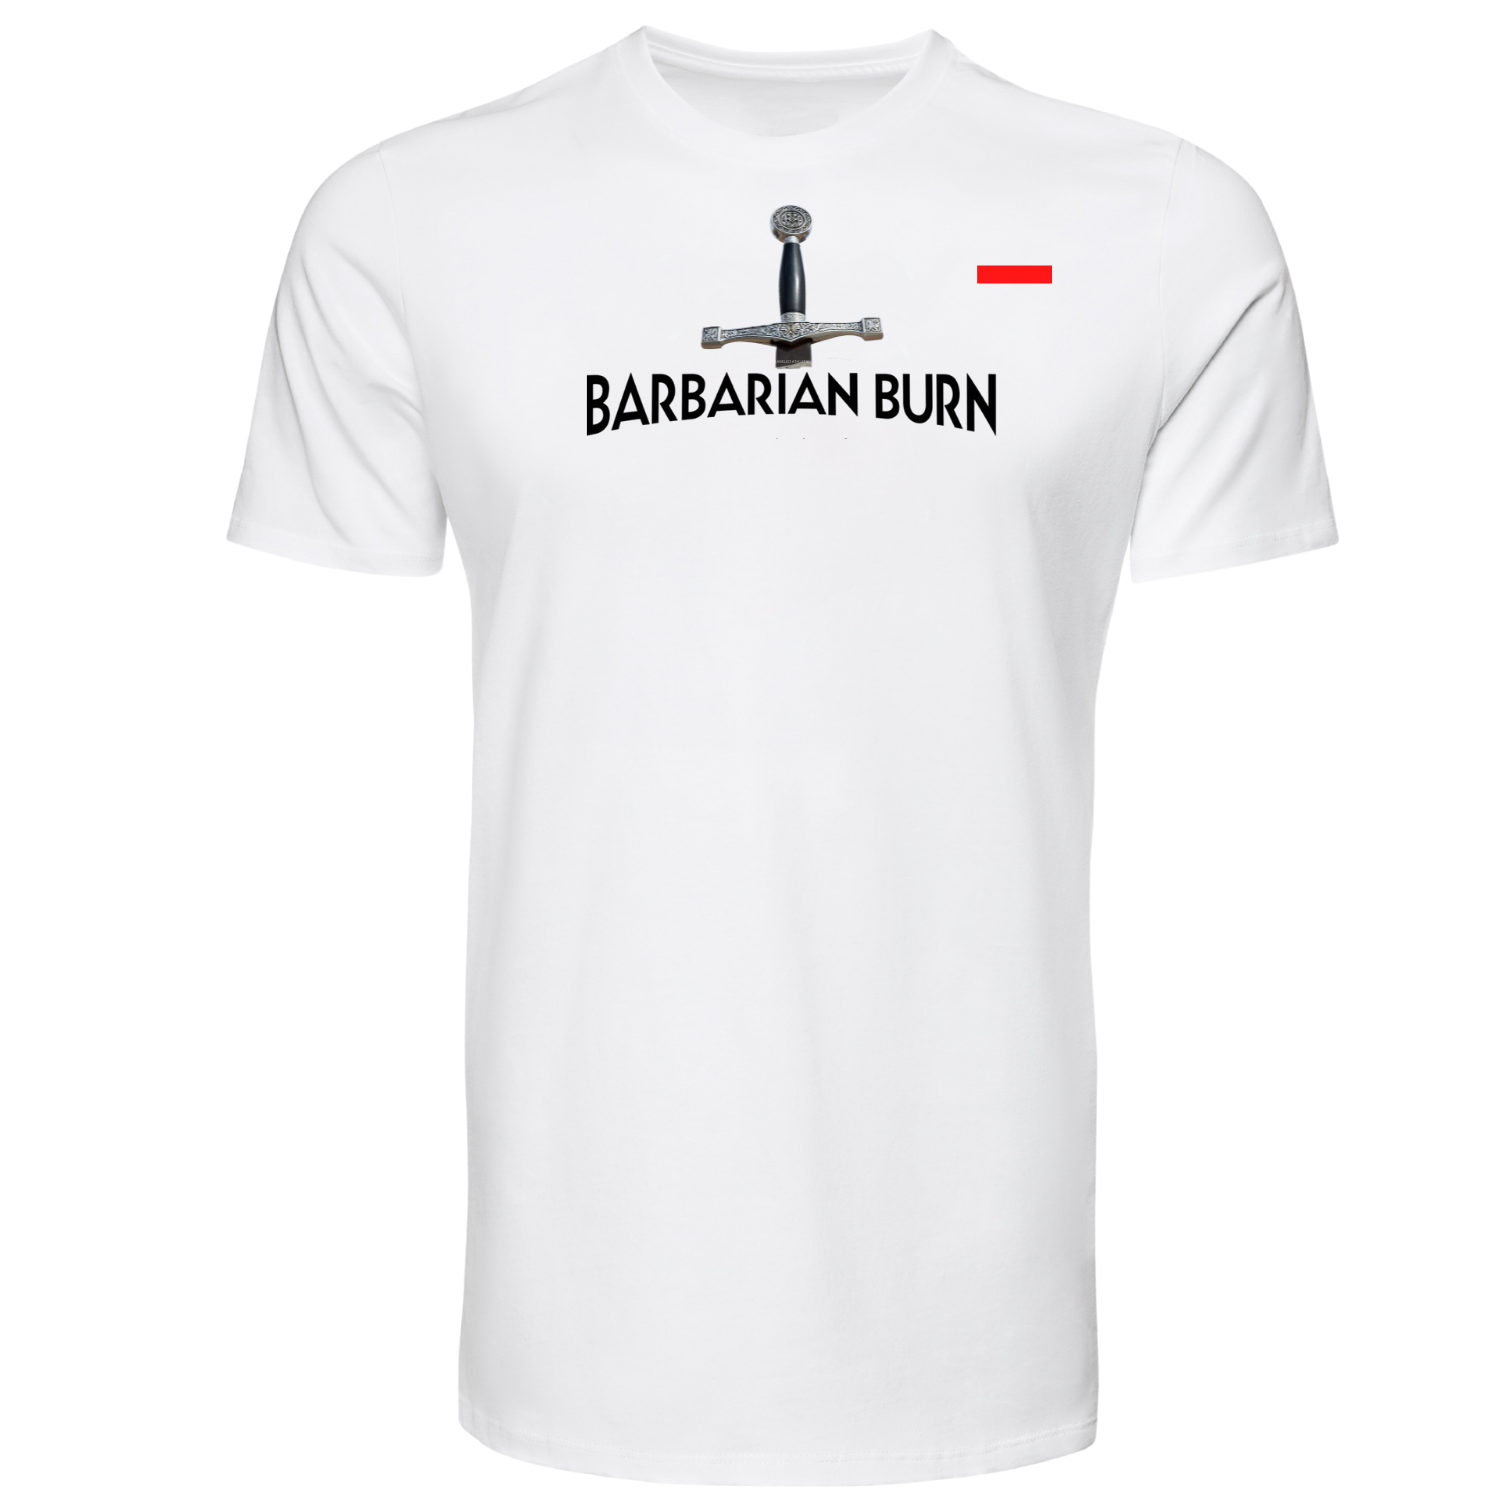 BARBARIAN (SWORD) BURN" - LABELED ATHLETIC T-SHIRT | WHITE/BLACK/RED